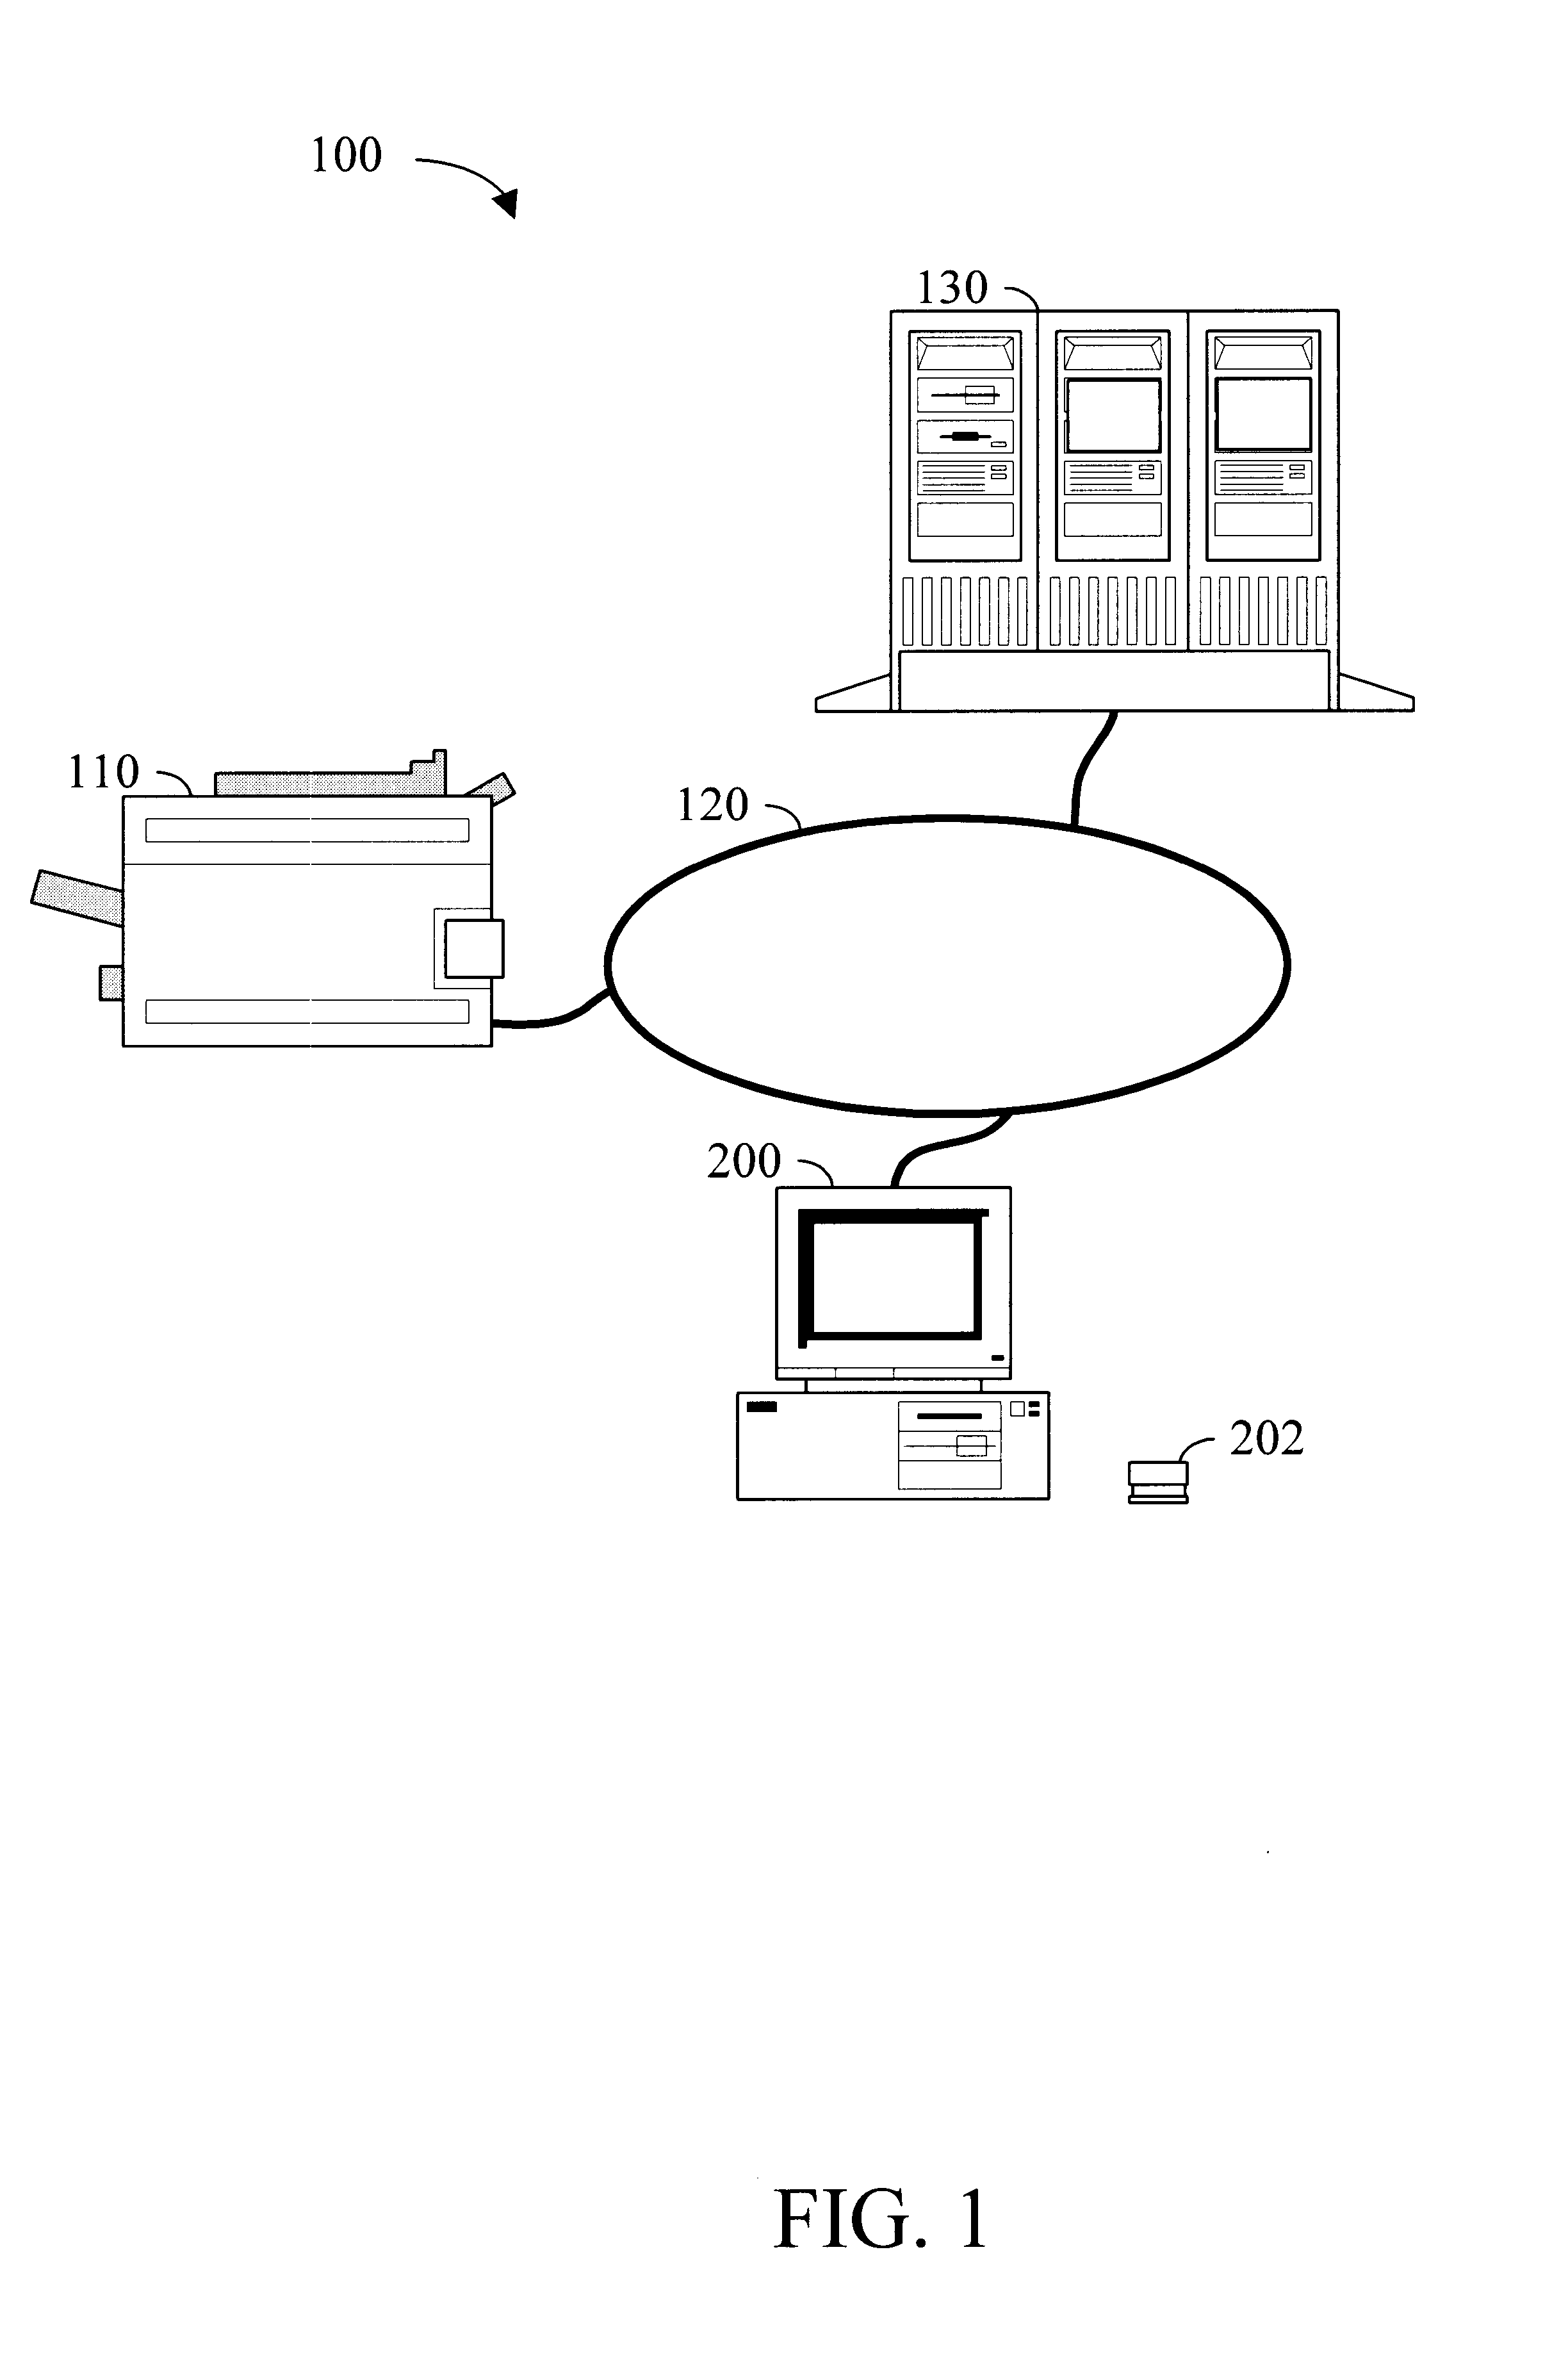 Apparatus and method for simultaneously managing paper-based documents and digital images of the same